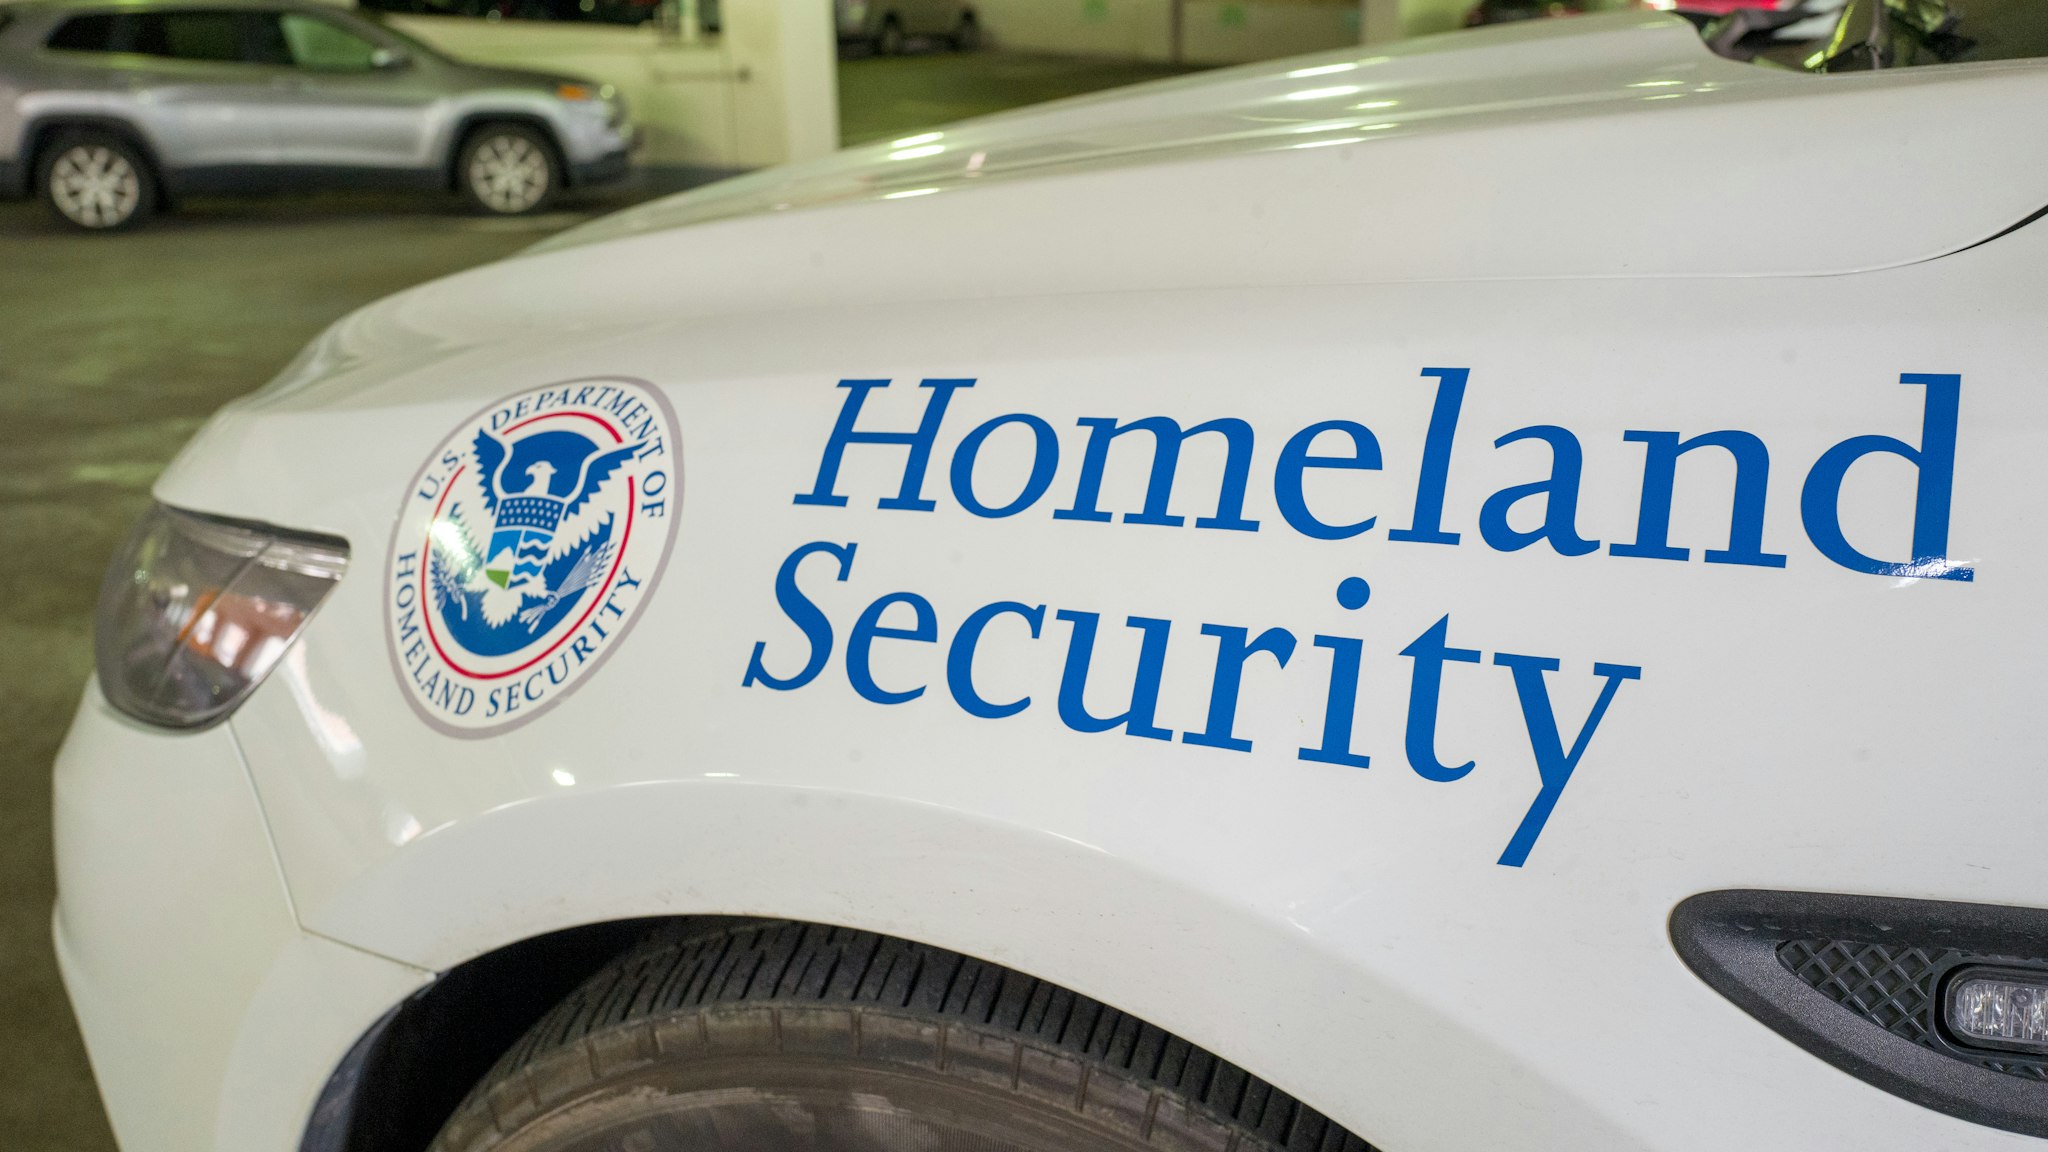 Close-up of logo for the United States Department of Homeland Security on an emergency vehicle in San Francisco, California, February 25, 2019.